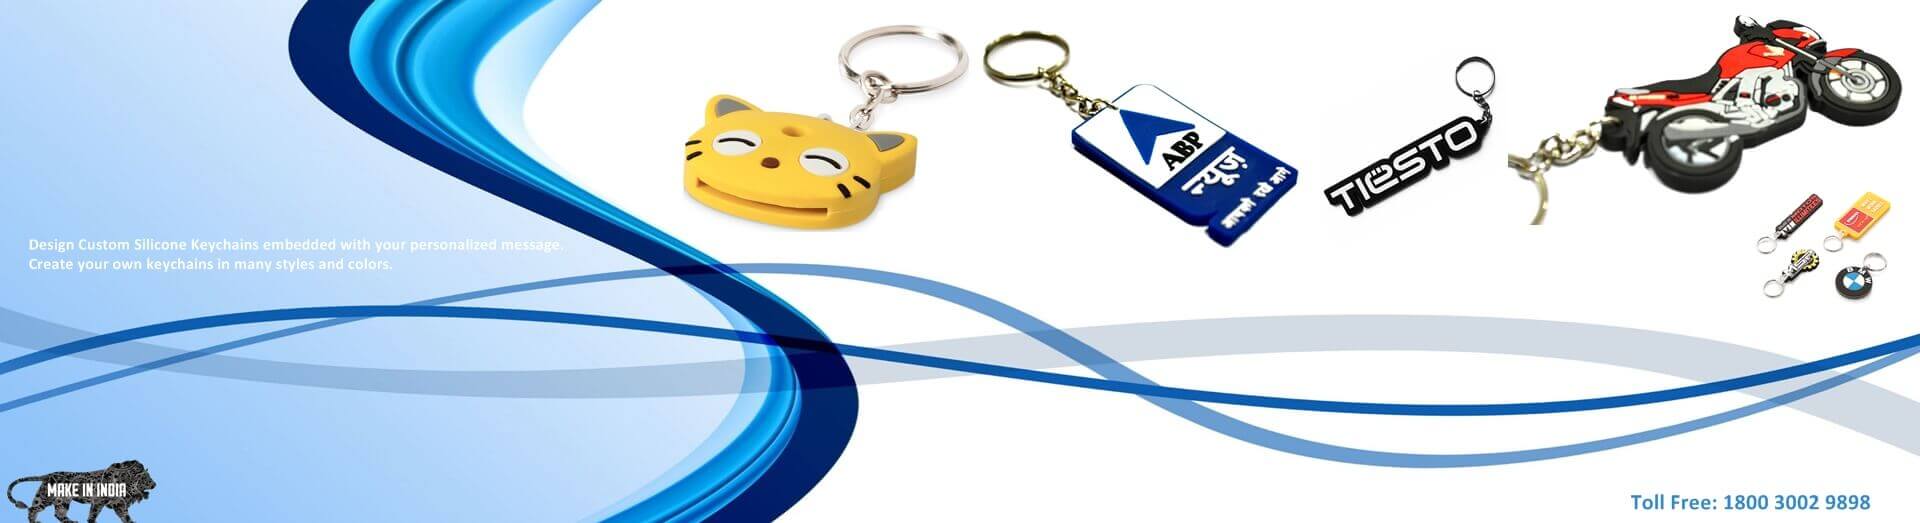 Rubber Keychain Manufacturer in Hyderabad,Keychain in Hyderabad,Keychain Manufacturer in Banglore,Promotional Keychain in Hyderabad,Customized Keychain in Banglore,Keychain Wholesaler in Hyderabad 